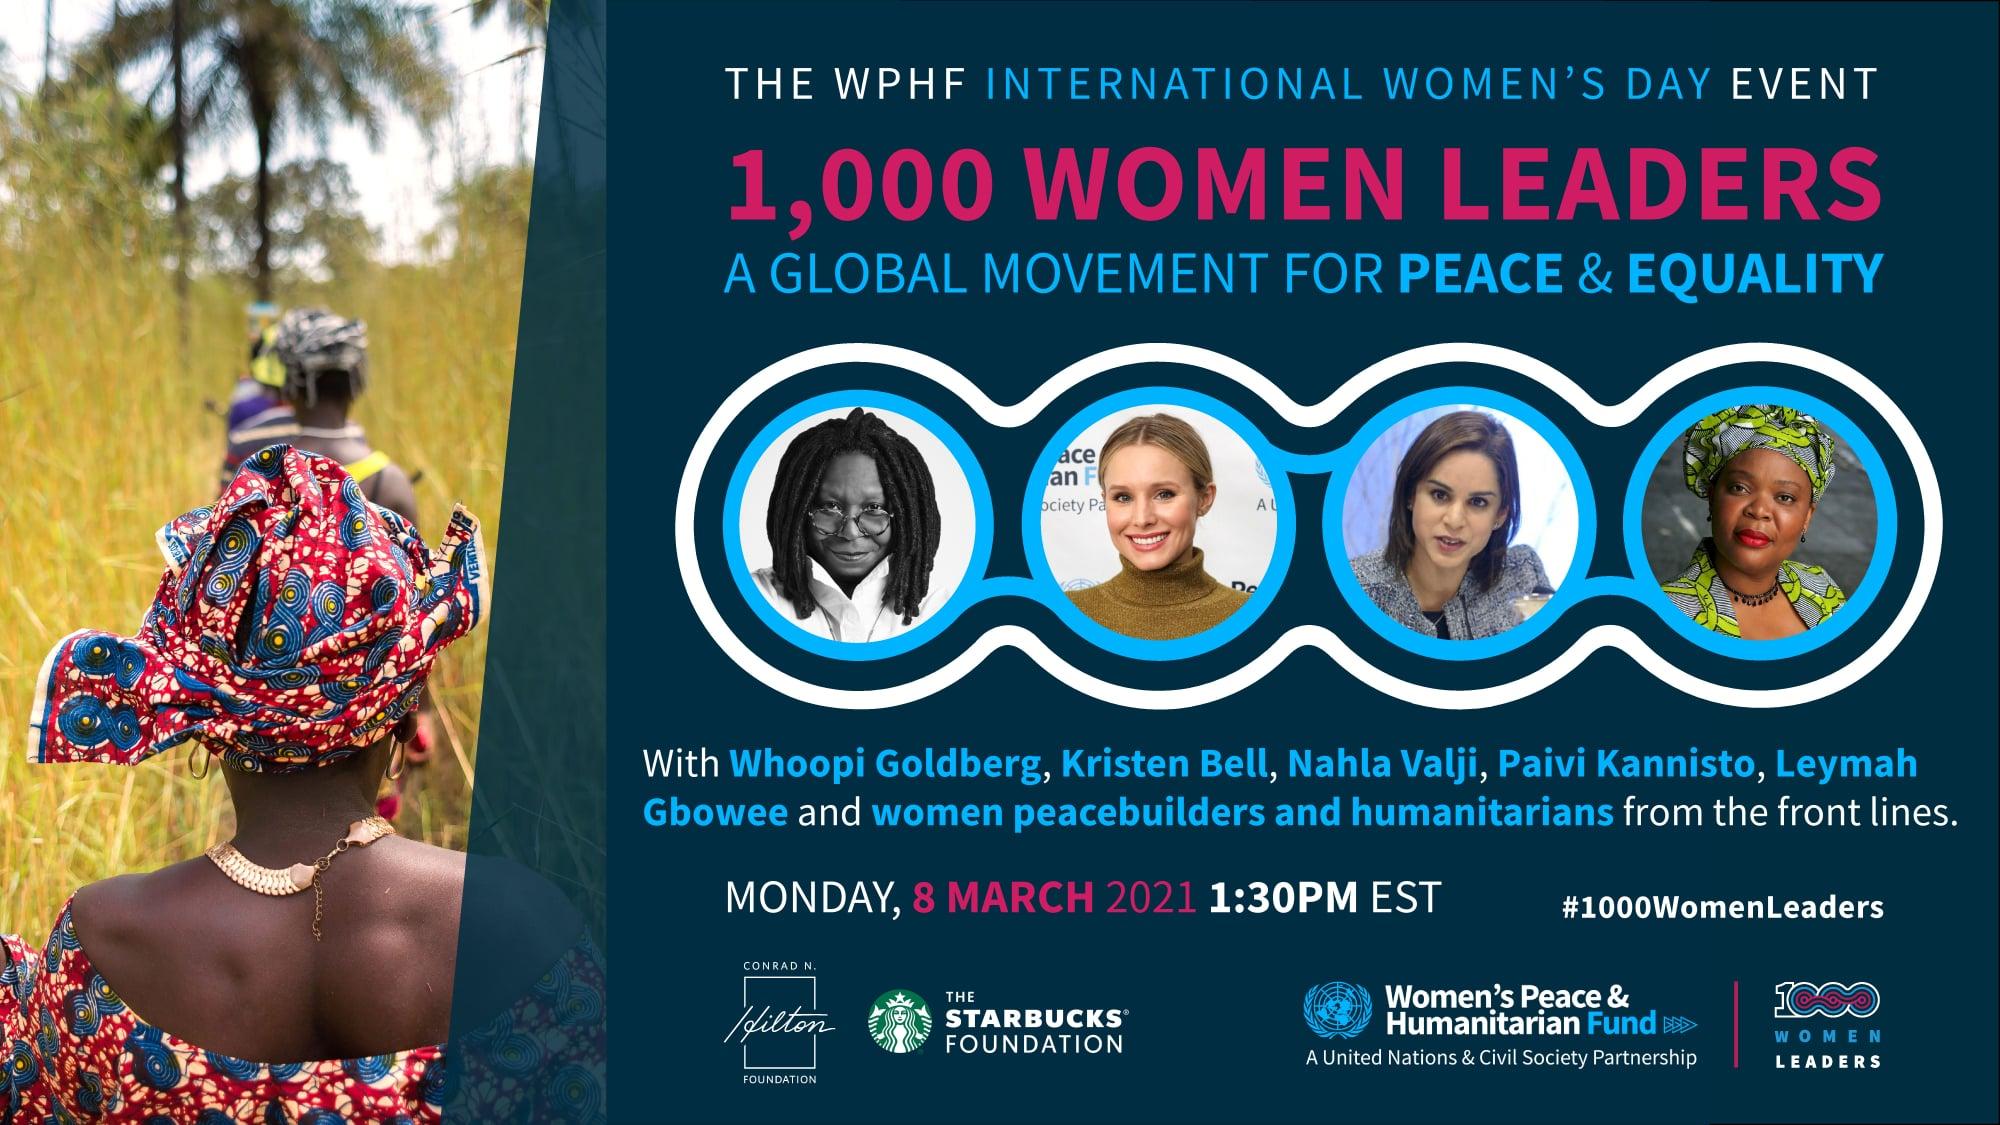 Ready for the launch of the #1000WomenLeaders campaign?